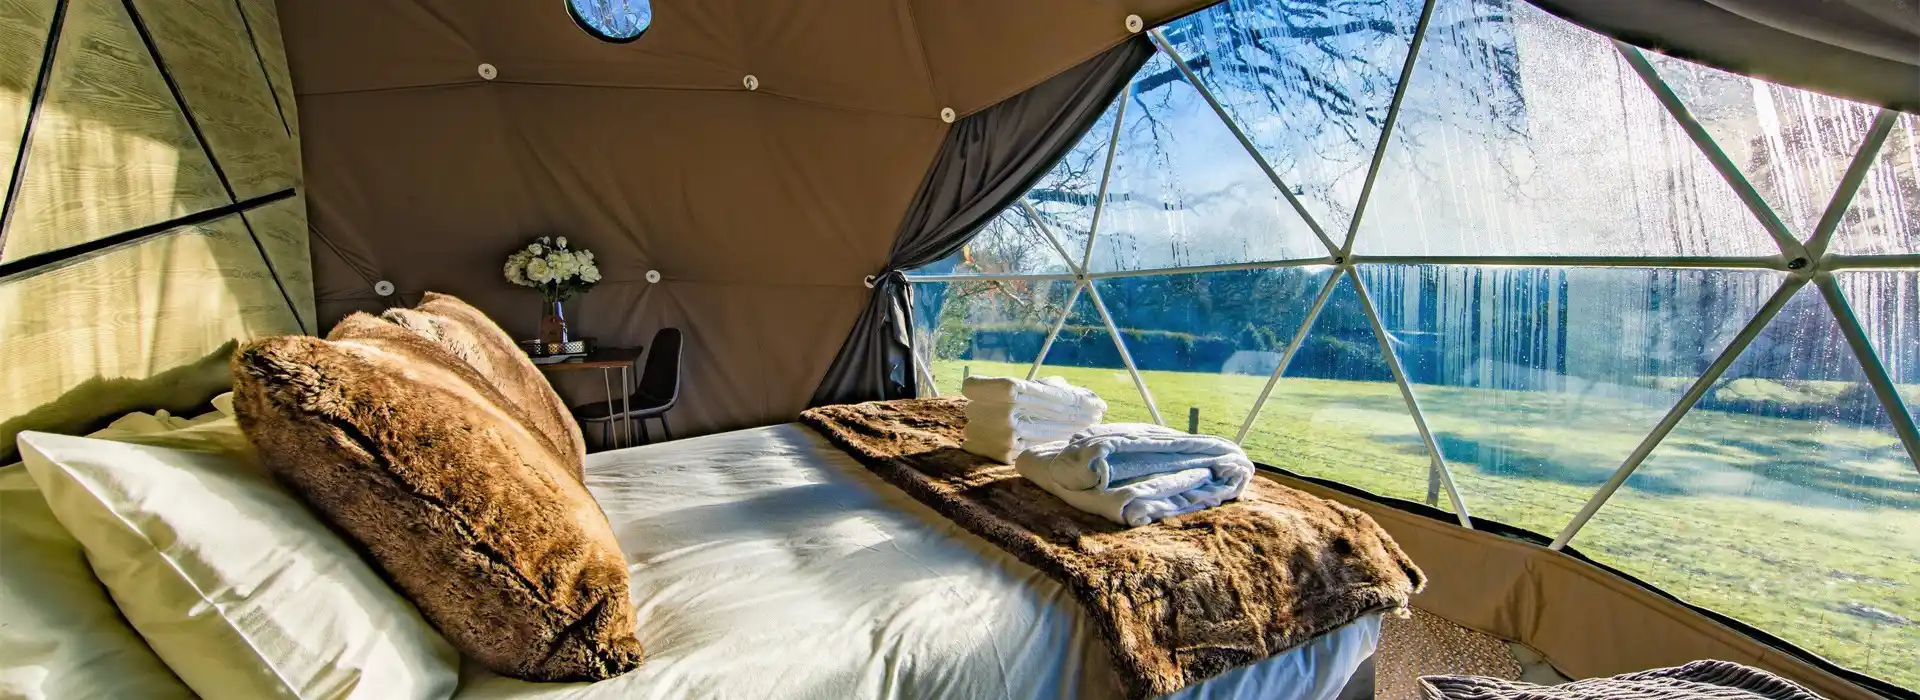 All year round glamping